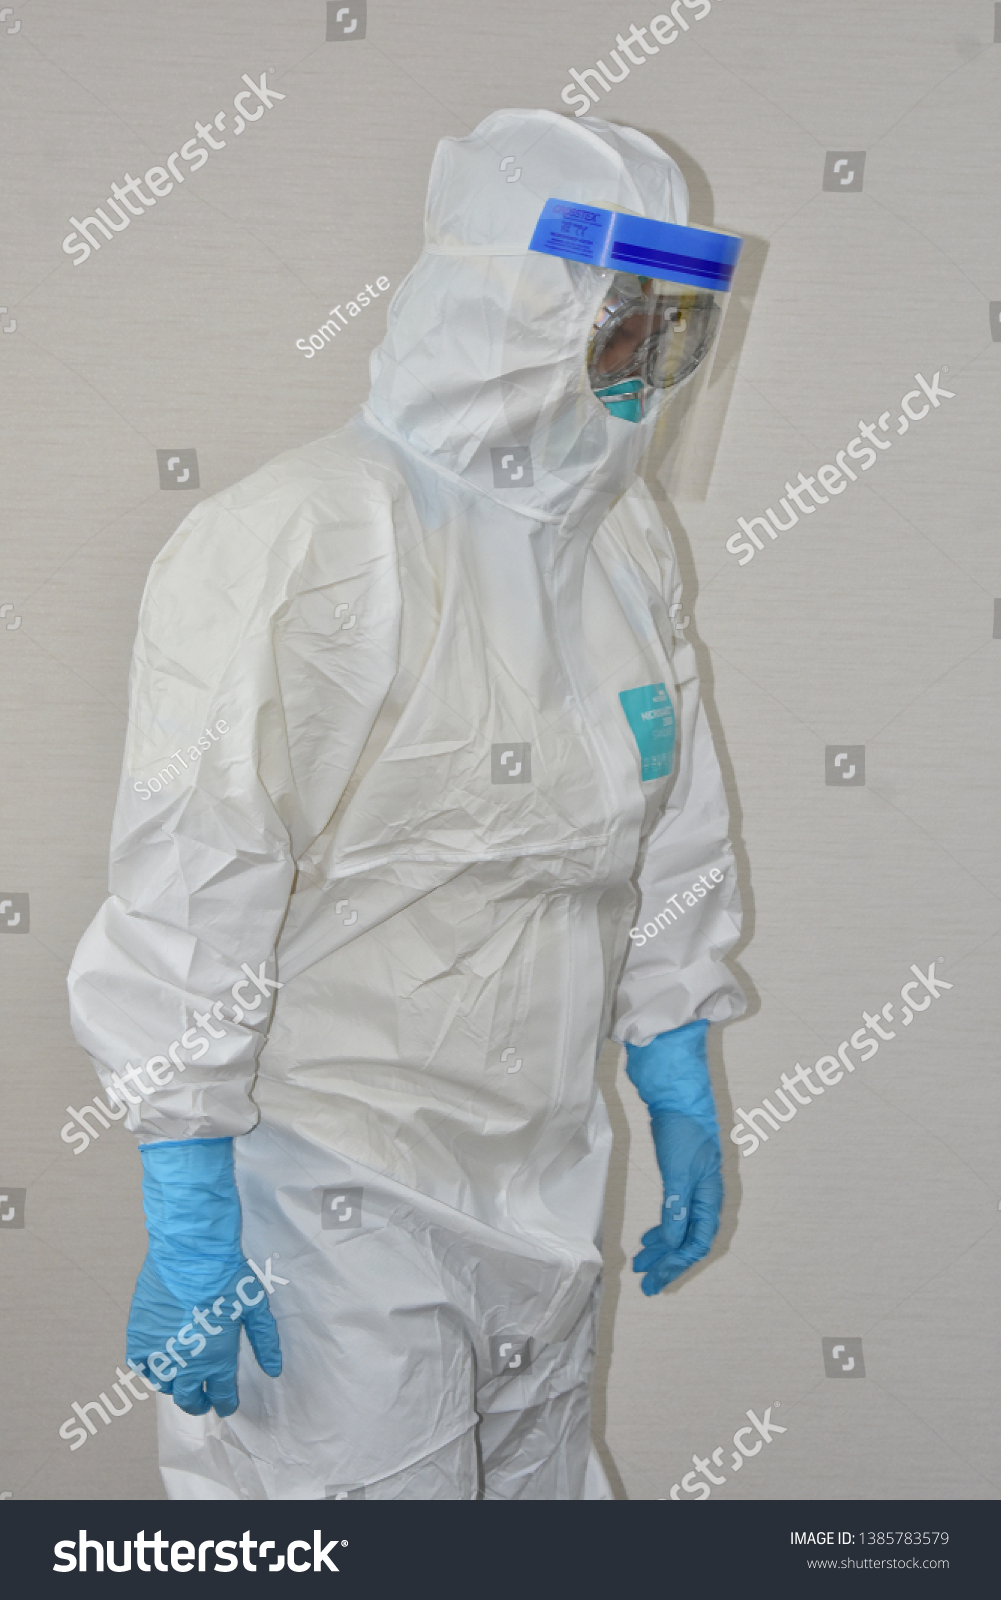 Protective sterile suit in hospital,Thailand #1385783579